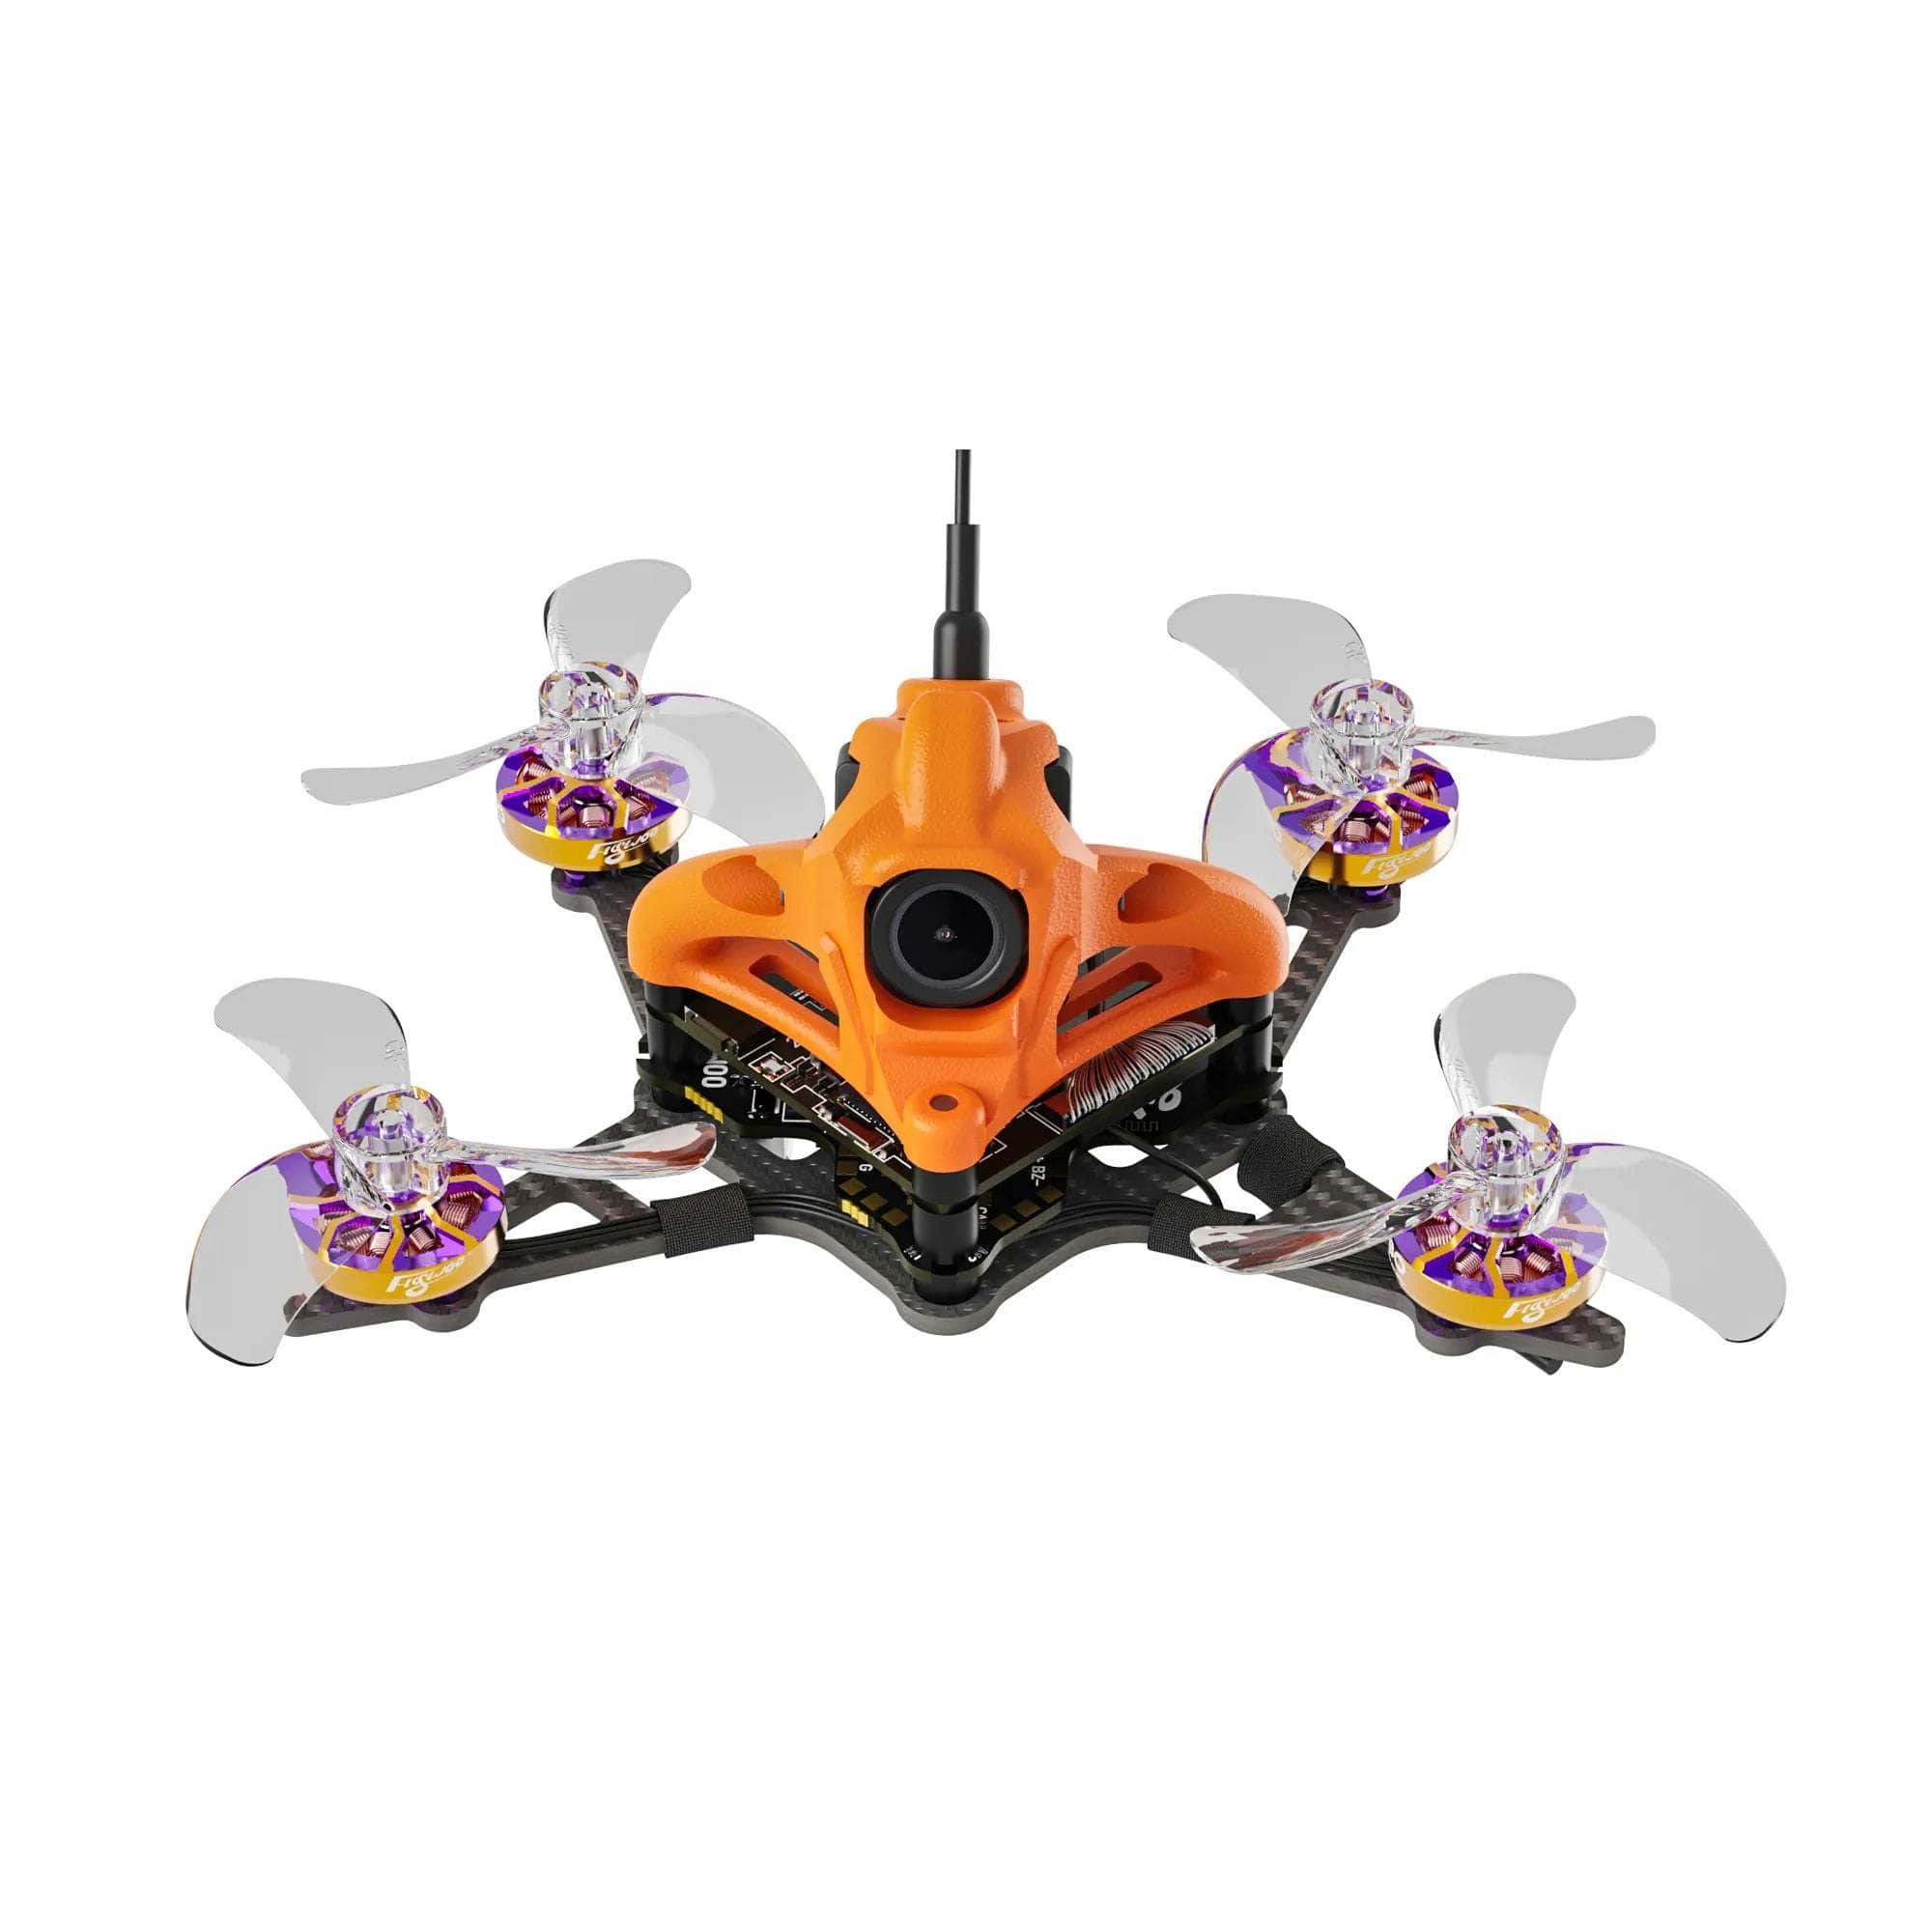 Bind and Fly Quads – The Black Market FPV